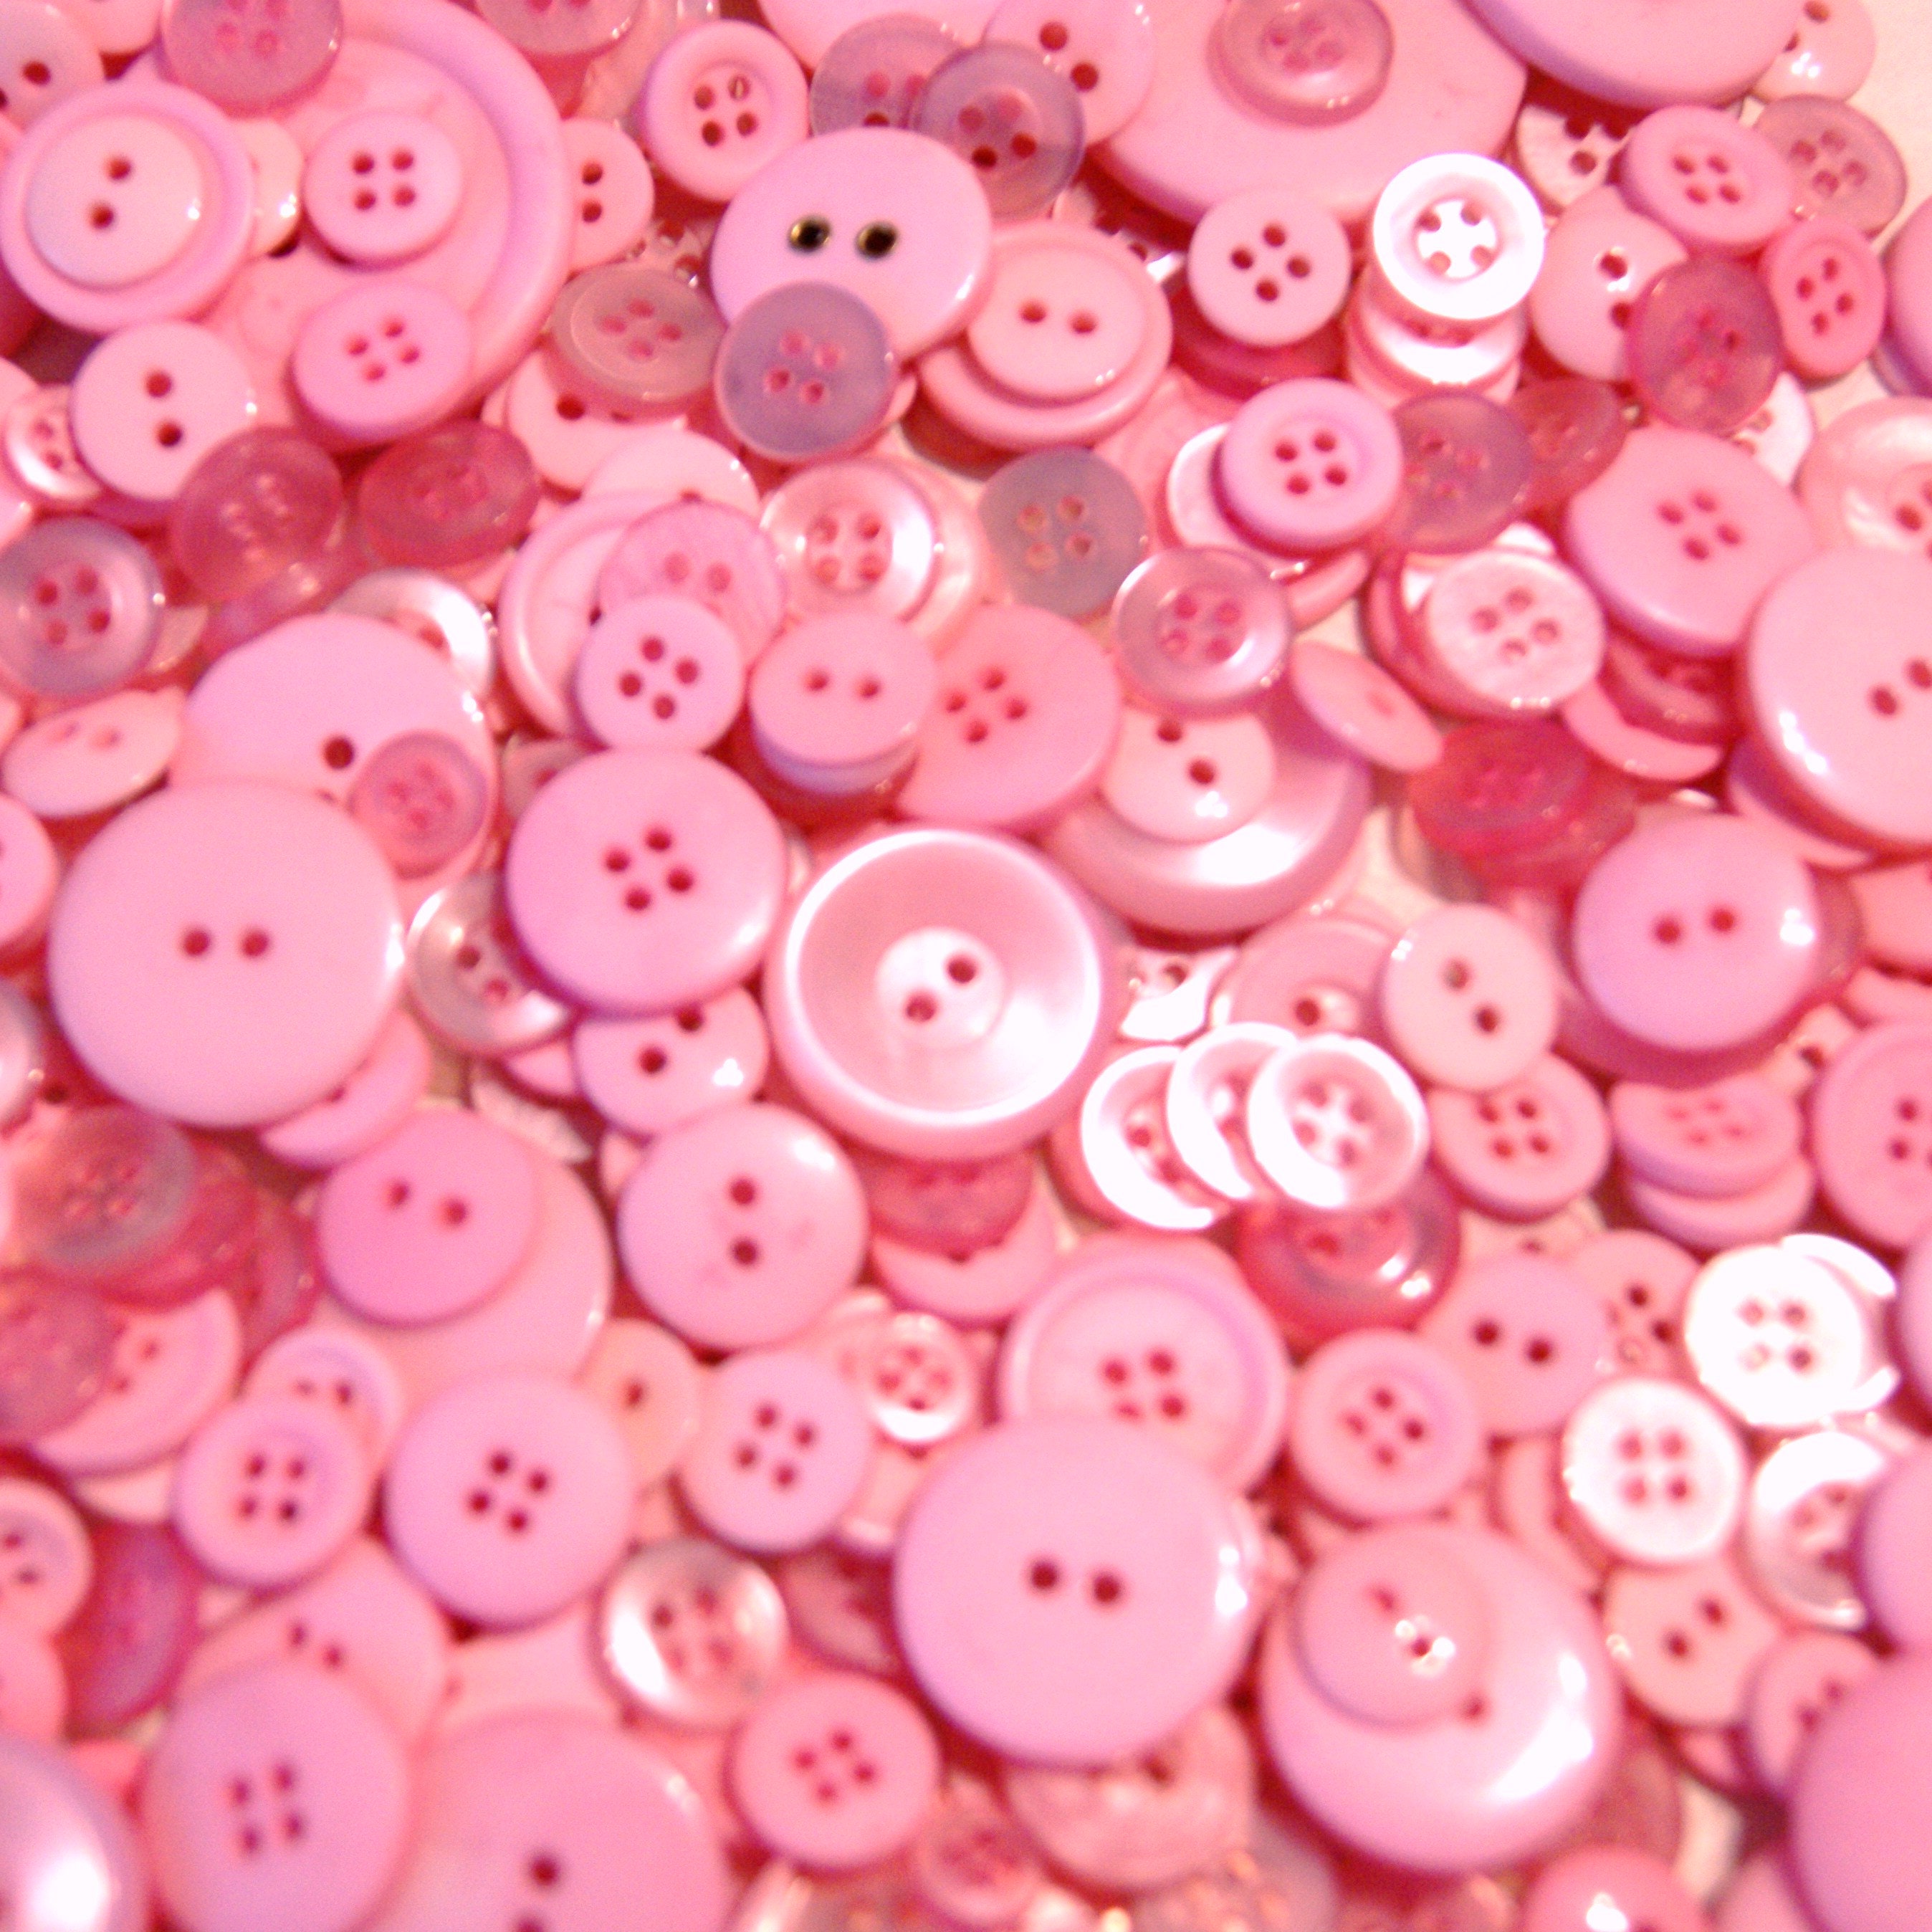 100 Pink Buttons, Mixed Assorted Sizes, Sewing Buttons, Craft